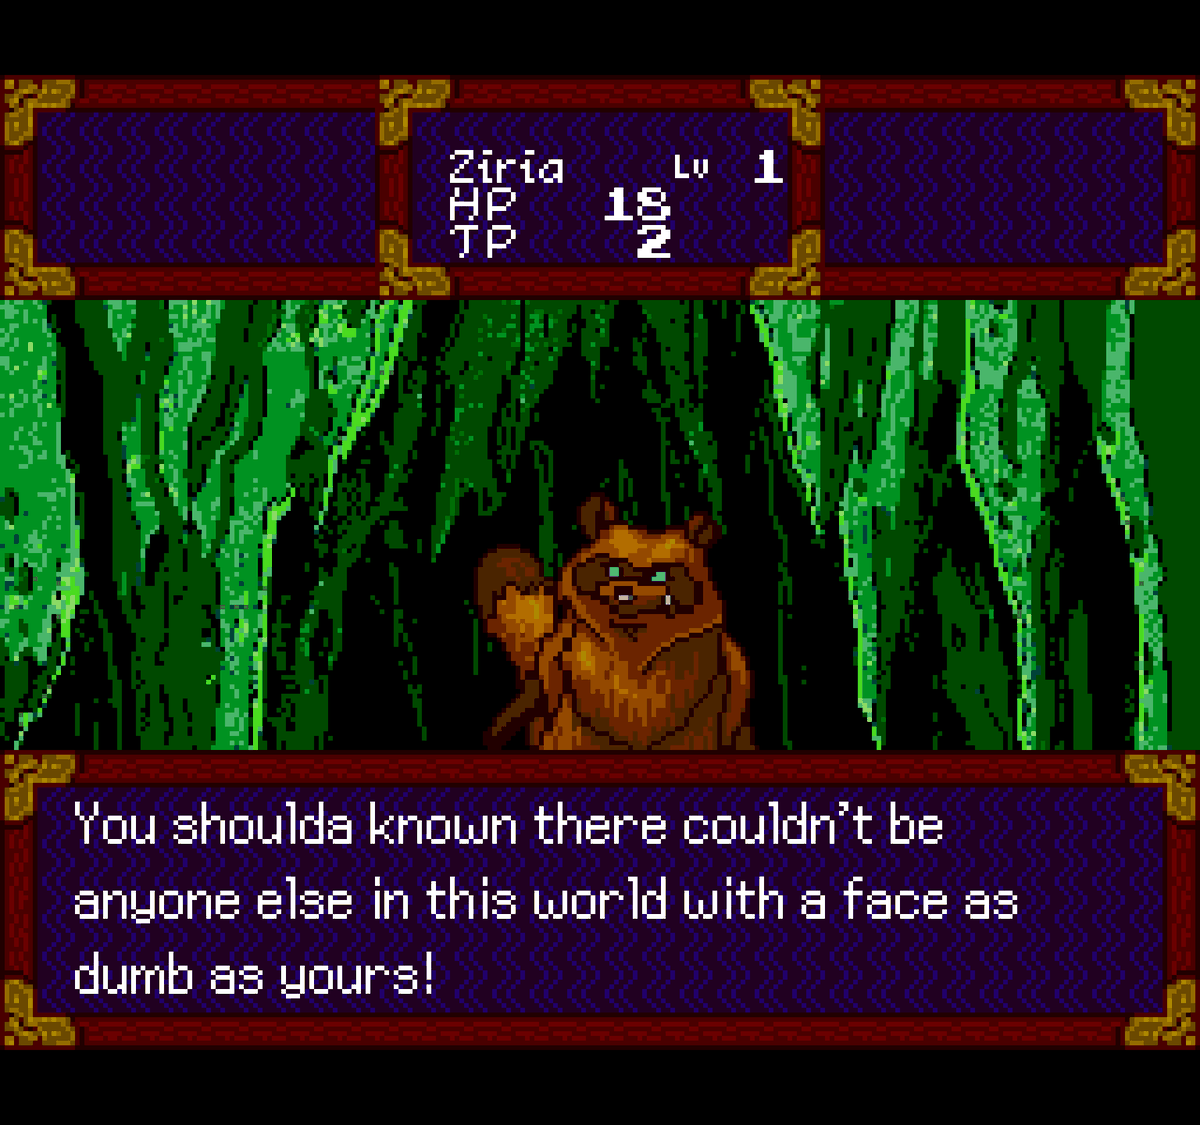 A pixelated tanuki standing in a green cave taunts the player.